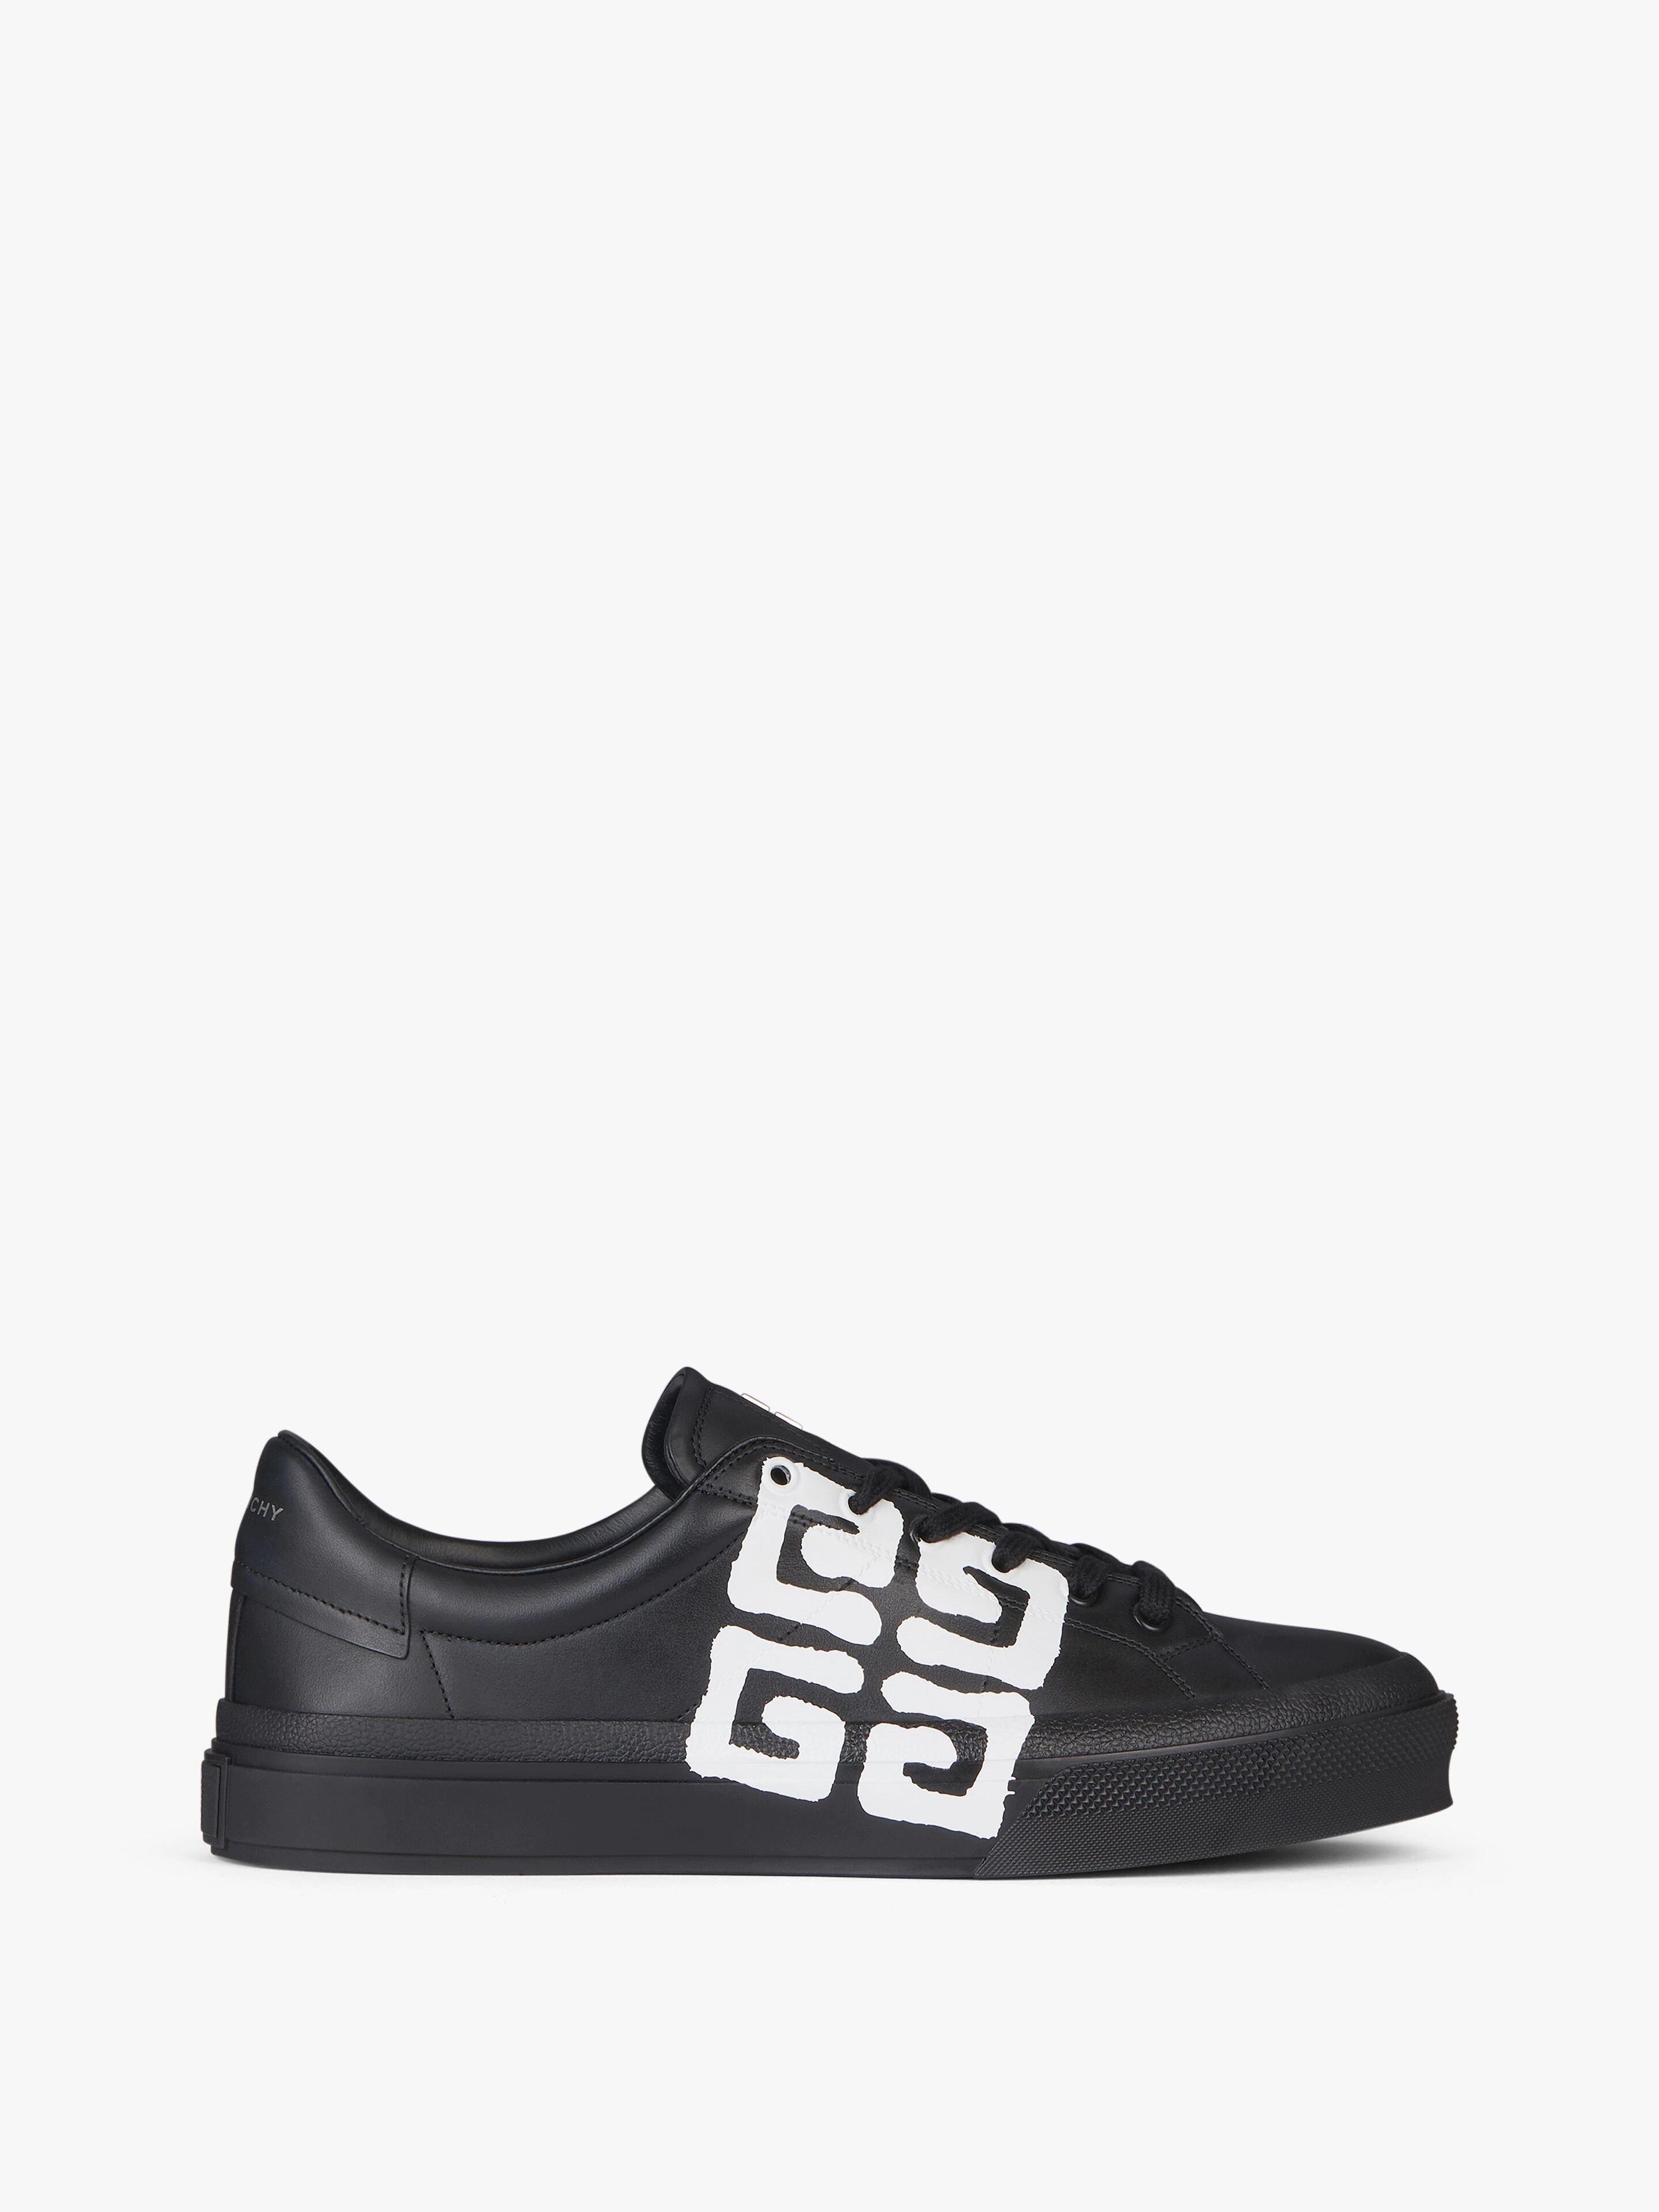 CITY SPORT SNEAKERS IN LEATHER WITH TAG EFFECT 4G PRINT - 1